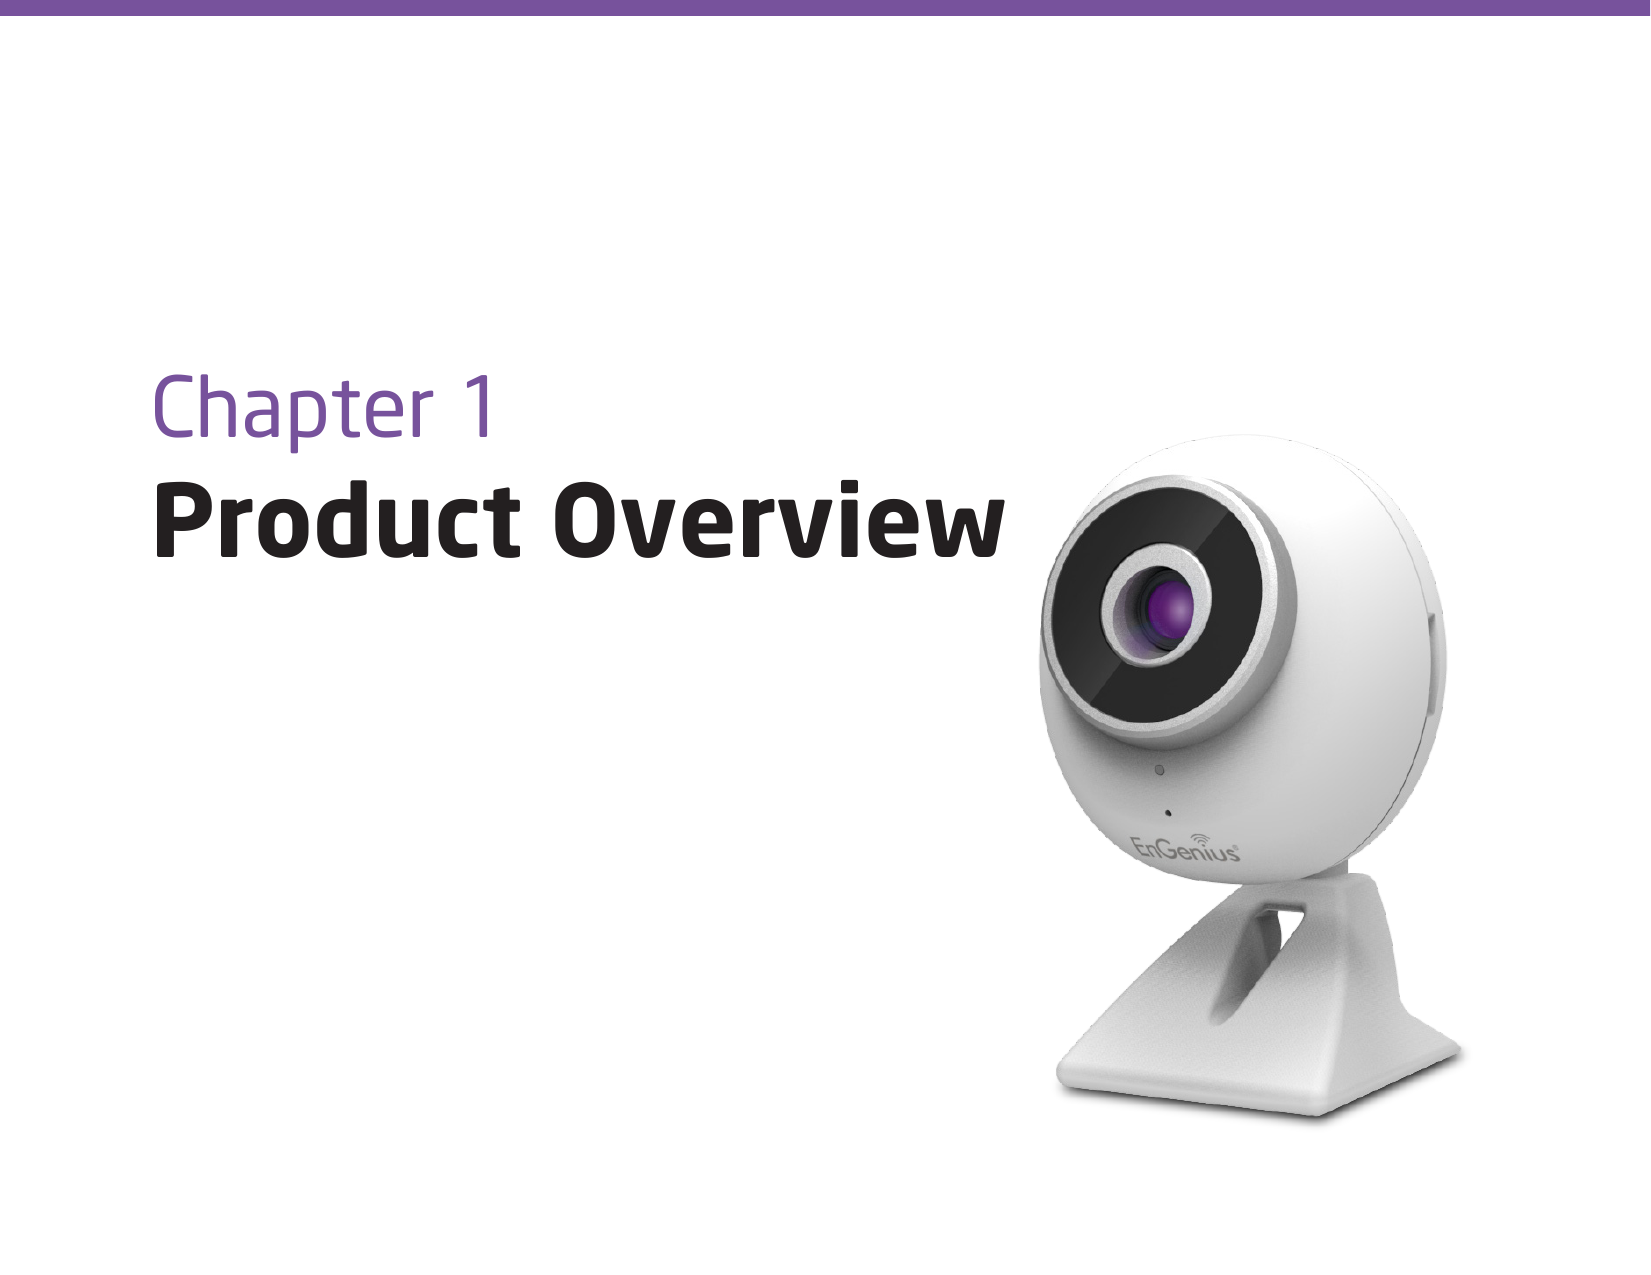 Chapter 1 Product Overview